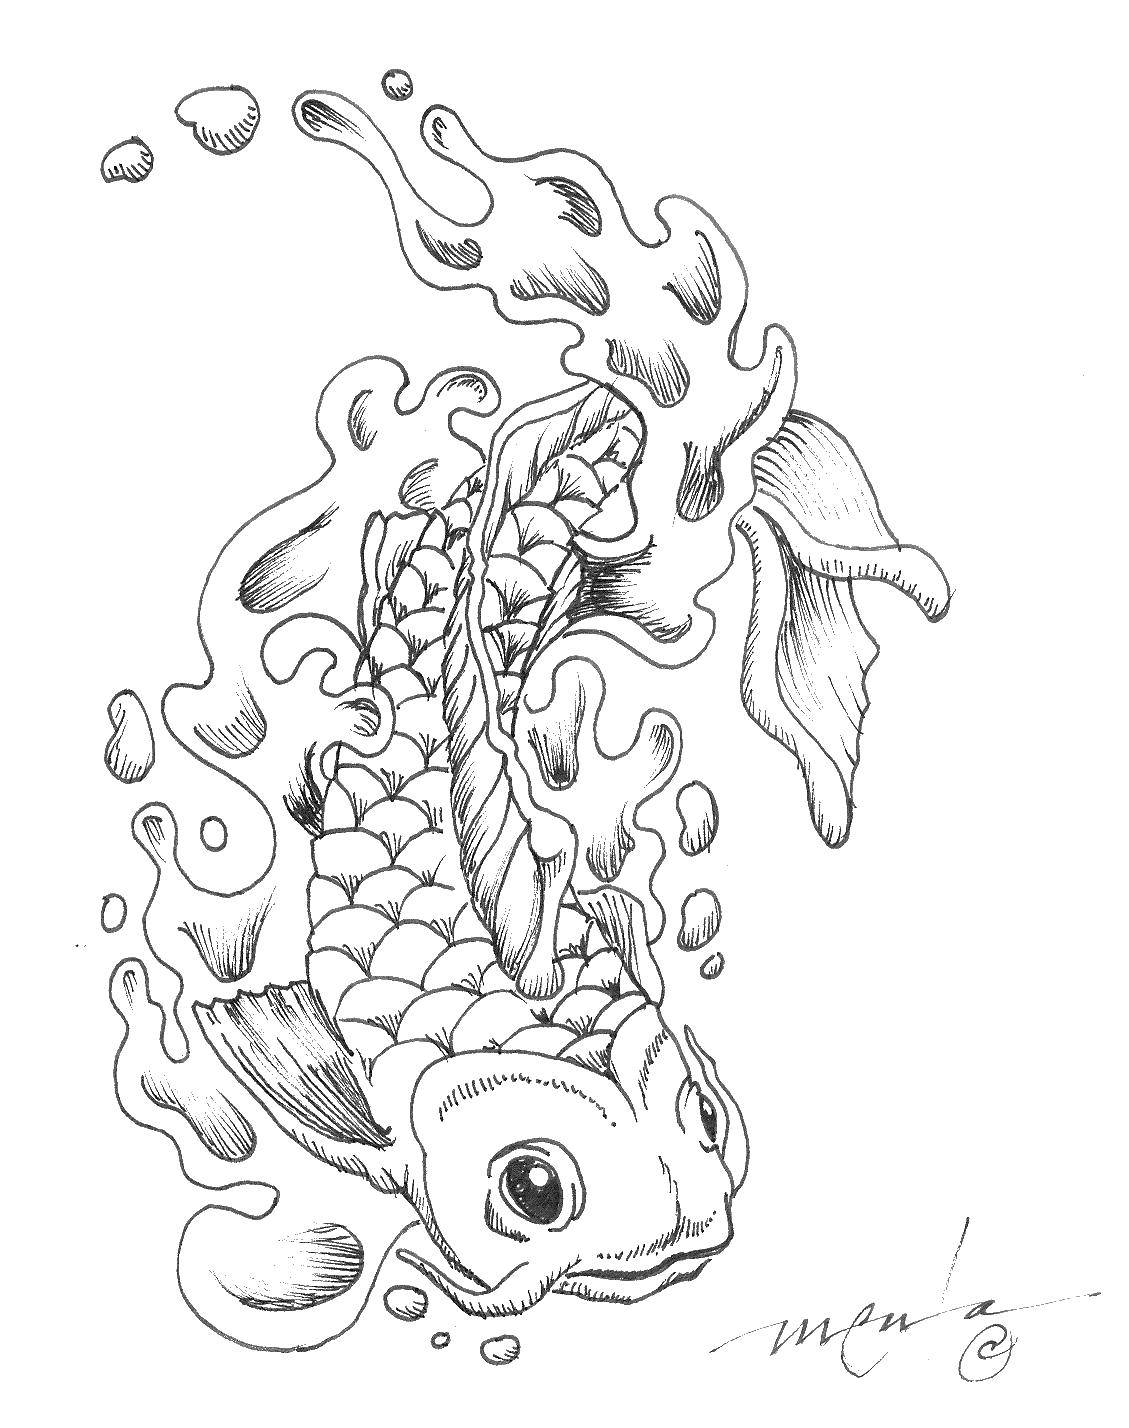 Coloring The carp in the water. Category coloring. Tags:  carp, water, fish.